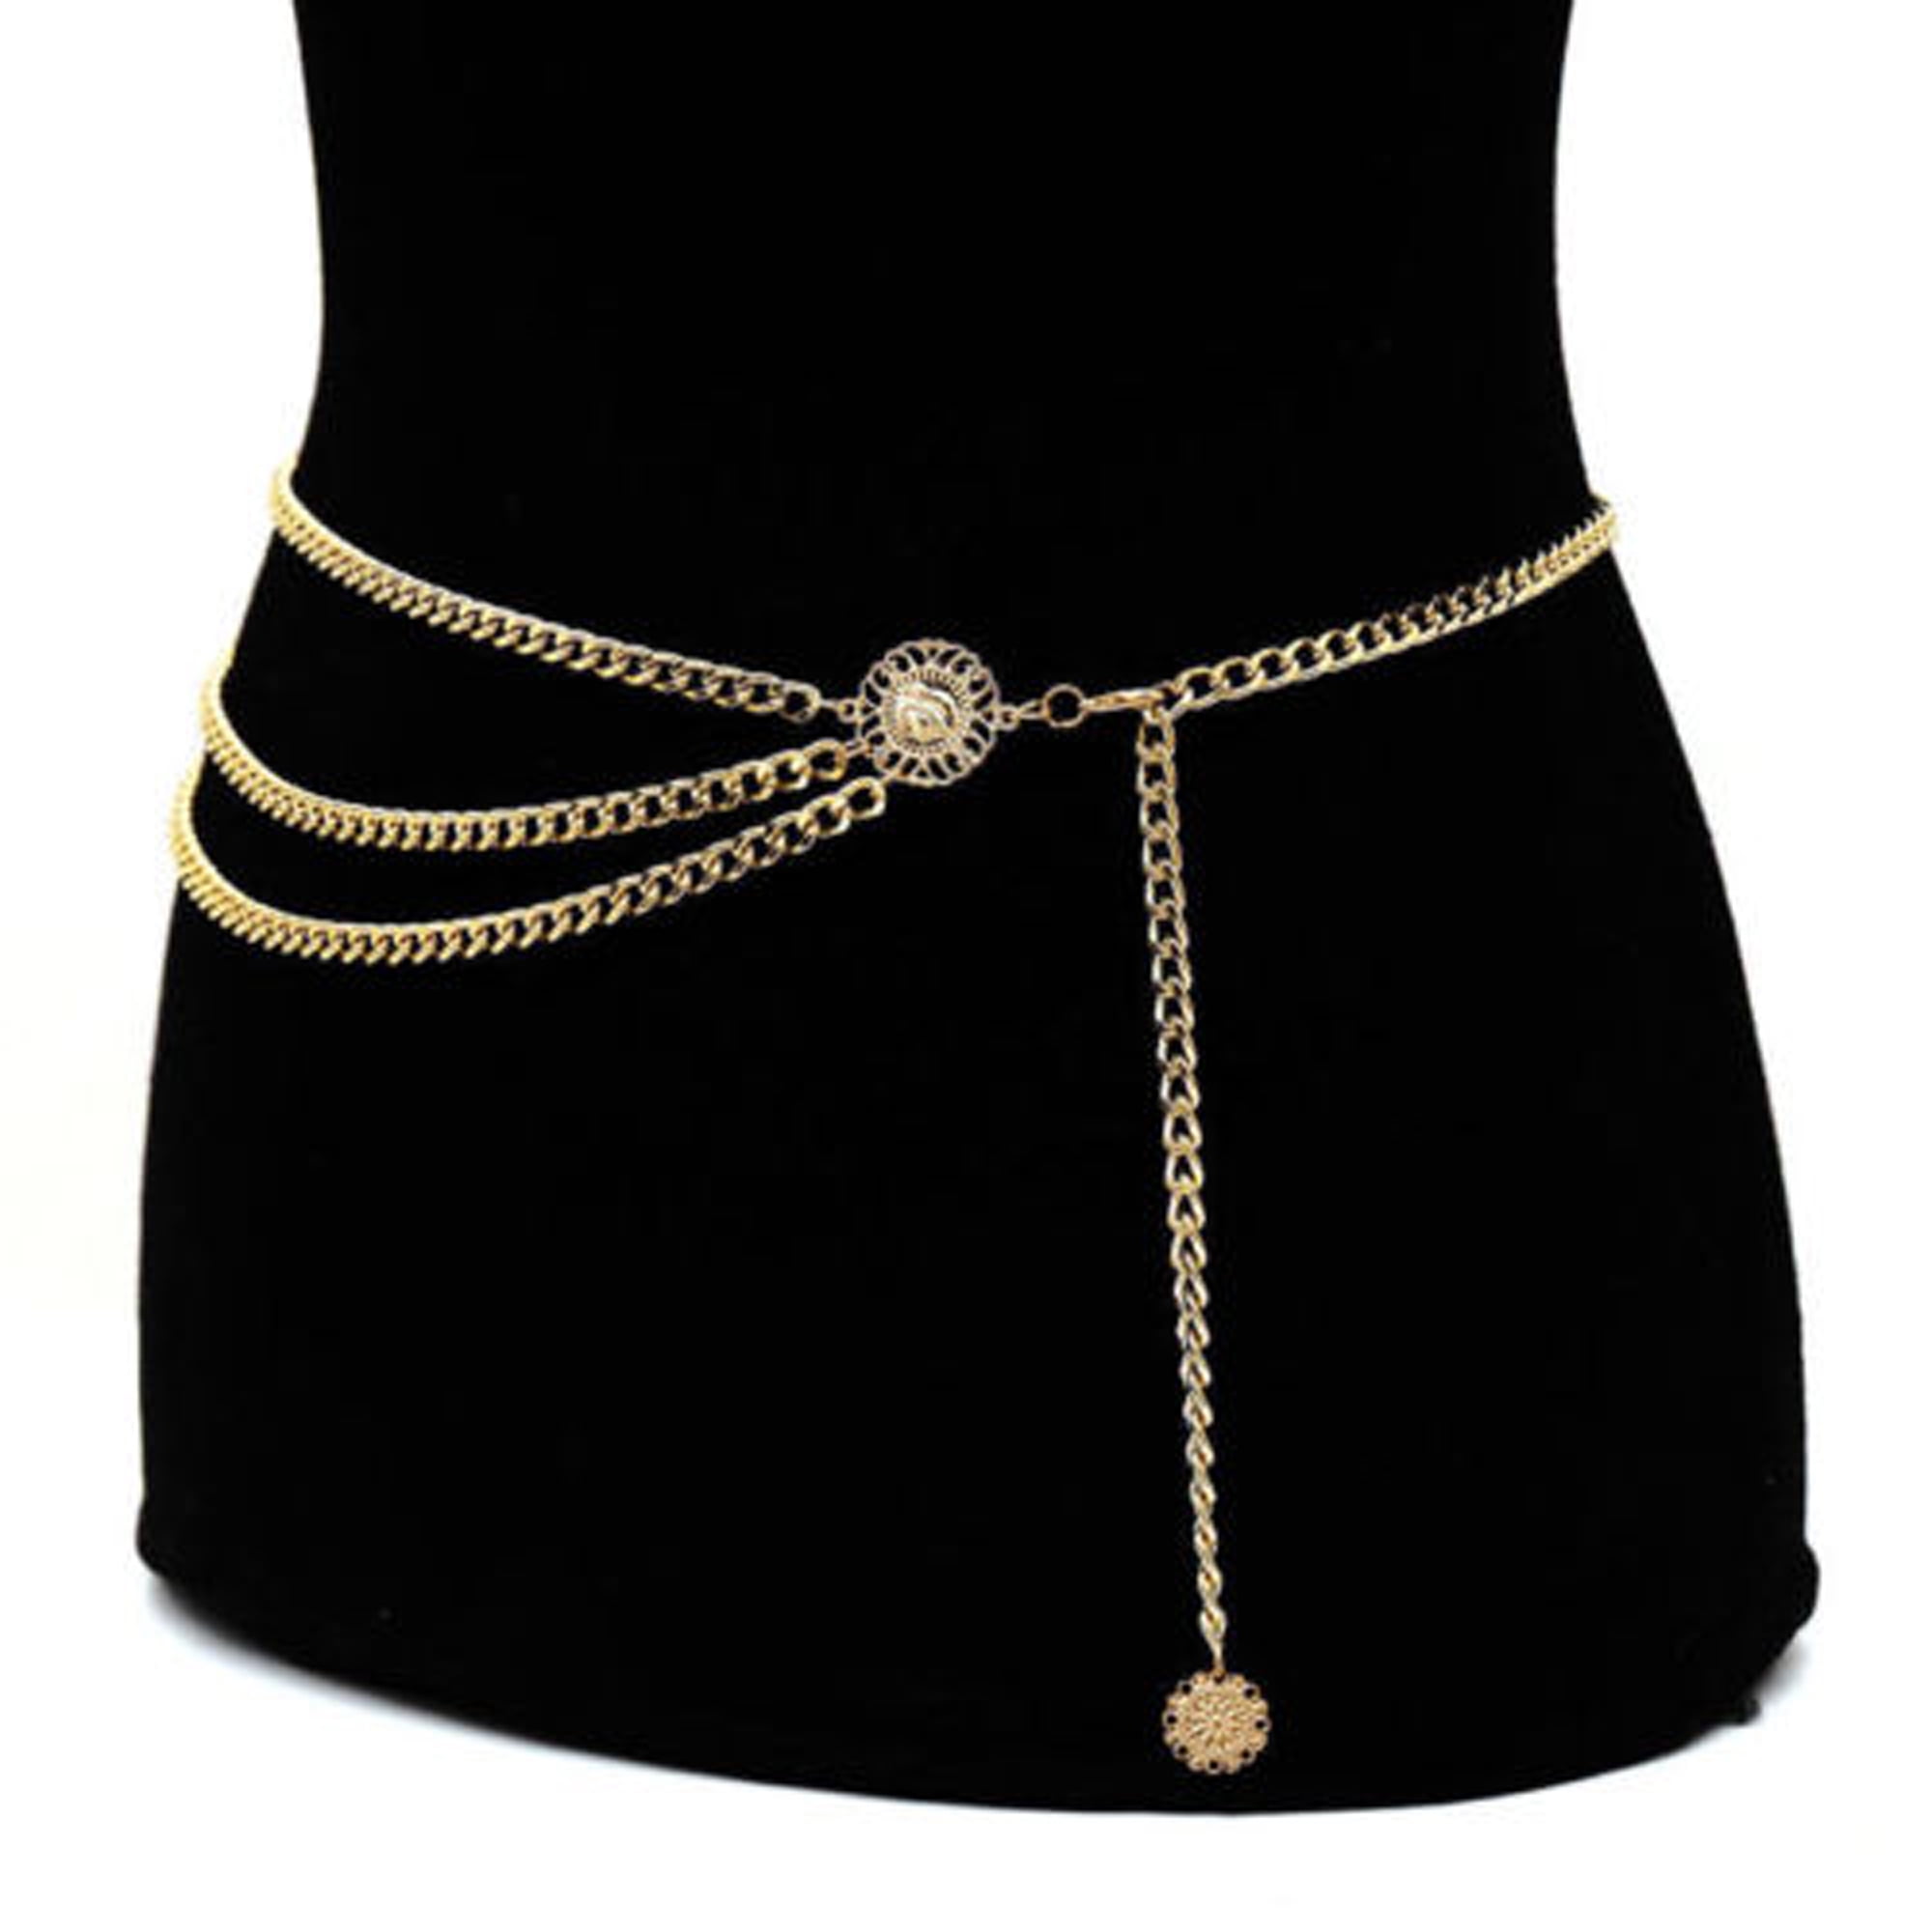 Clothing, Shoes & Accessories Body Chain Belts Thin Dresses Belts ...